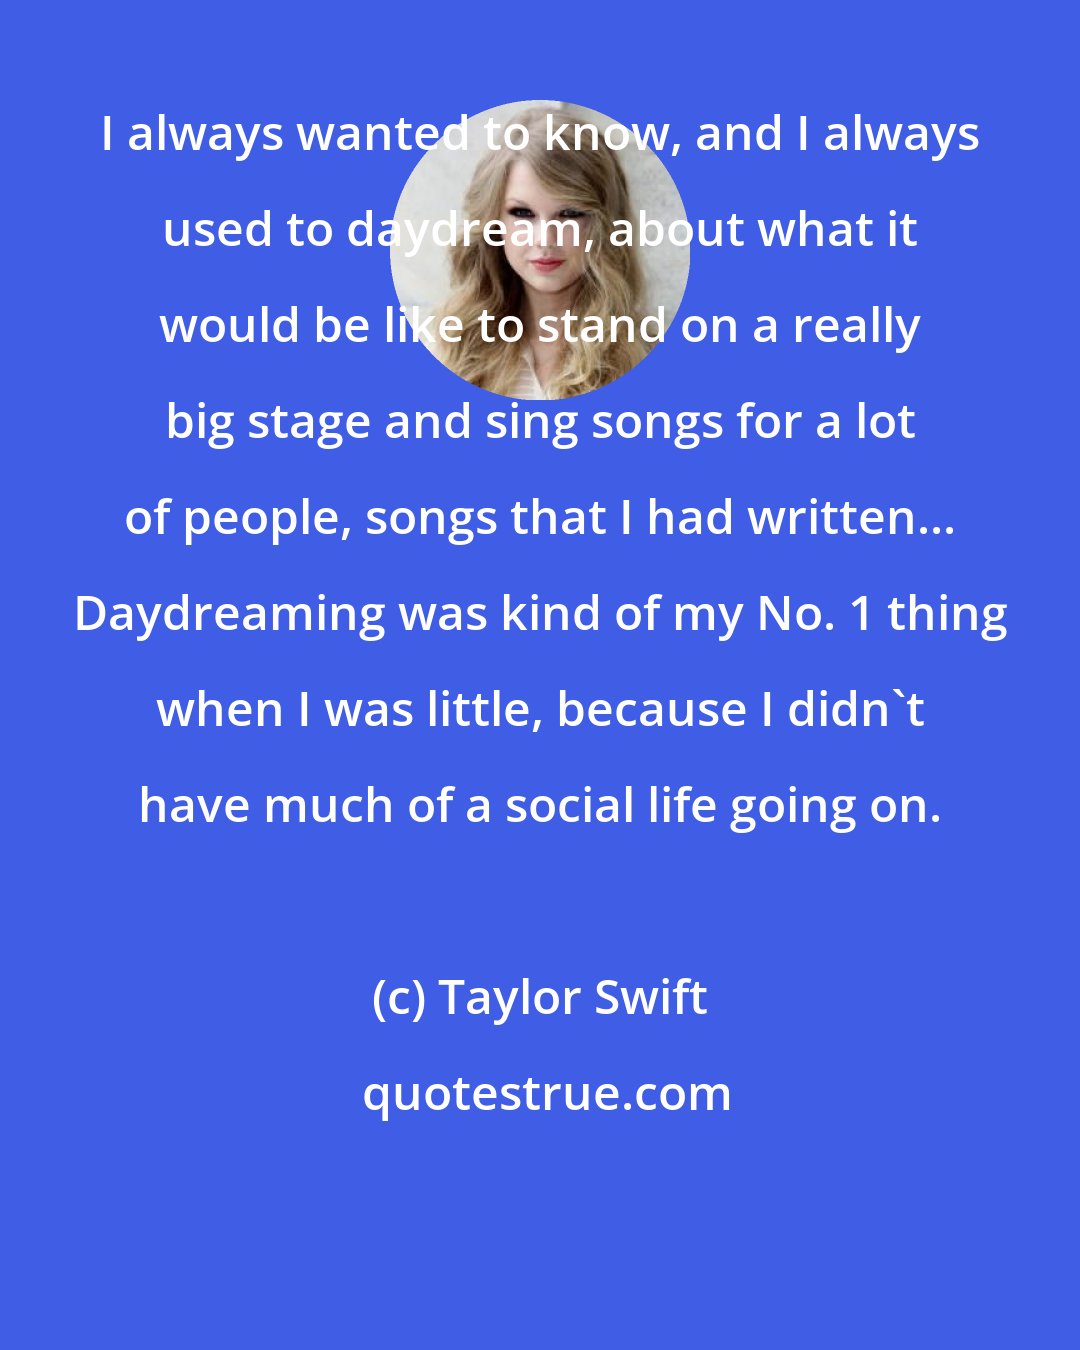 Taylor Swift: I always wanted to know, and I always used to daydream, about what it would be like to stand on a really big stage and sing songs for a lot of people, songs that I had written... Daydreaming was kind of my No. 1 thing when I was little, because I didn't have much of a social life going on.